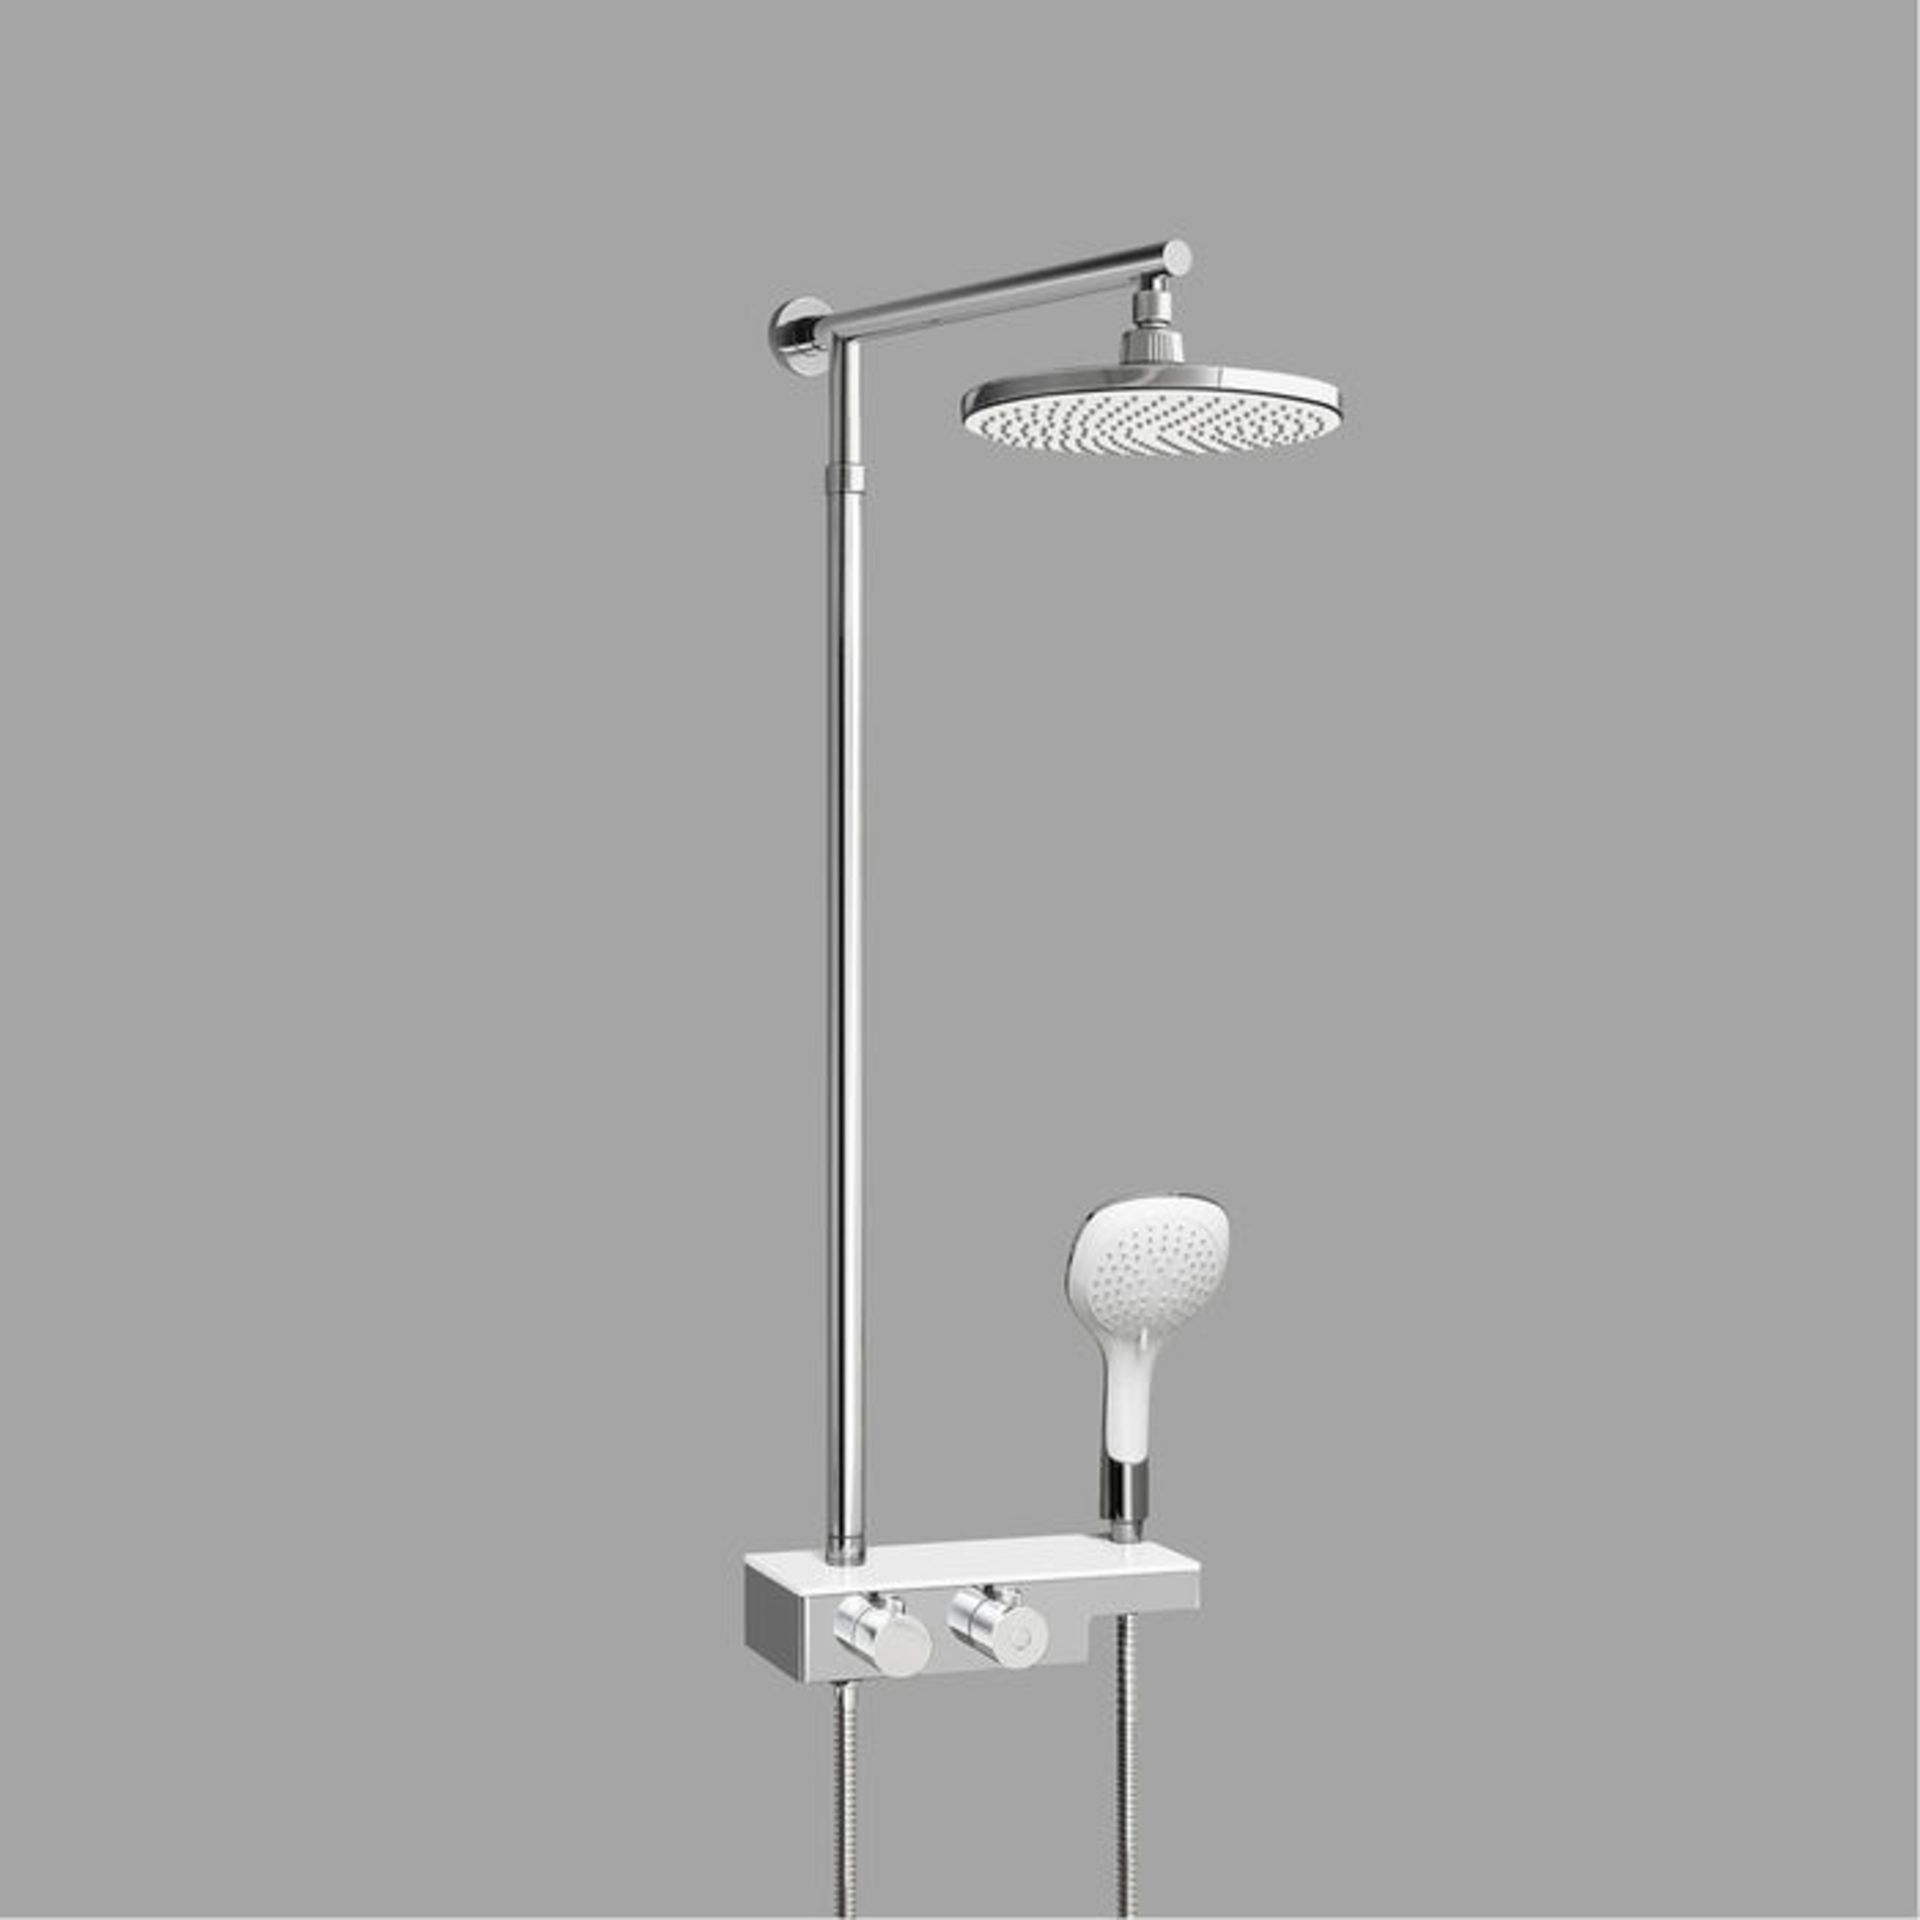 (CT196) Round Exposed Thermostatic Mixer Shower Kit Medium Head & Shelf. Cool to touch shower for - Bild 2 aus 4